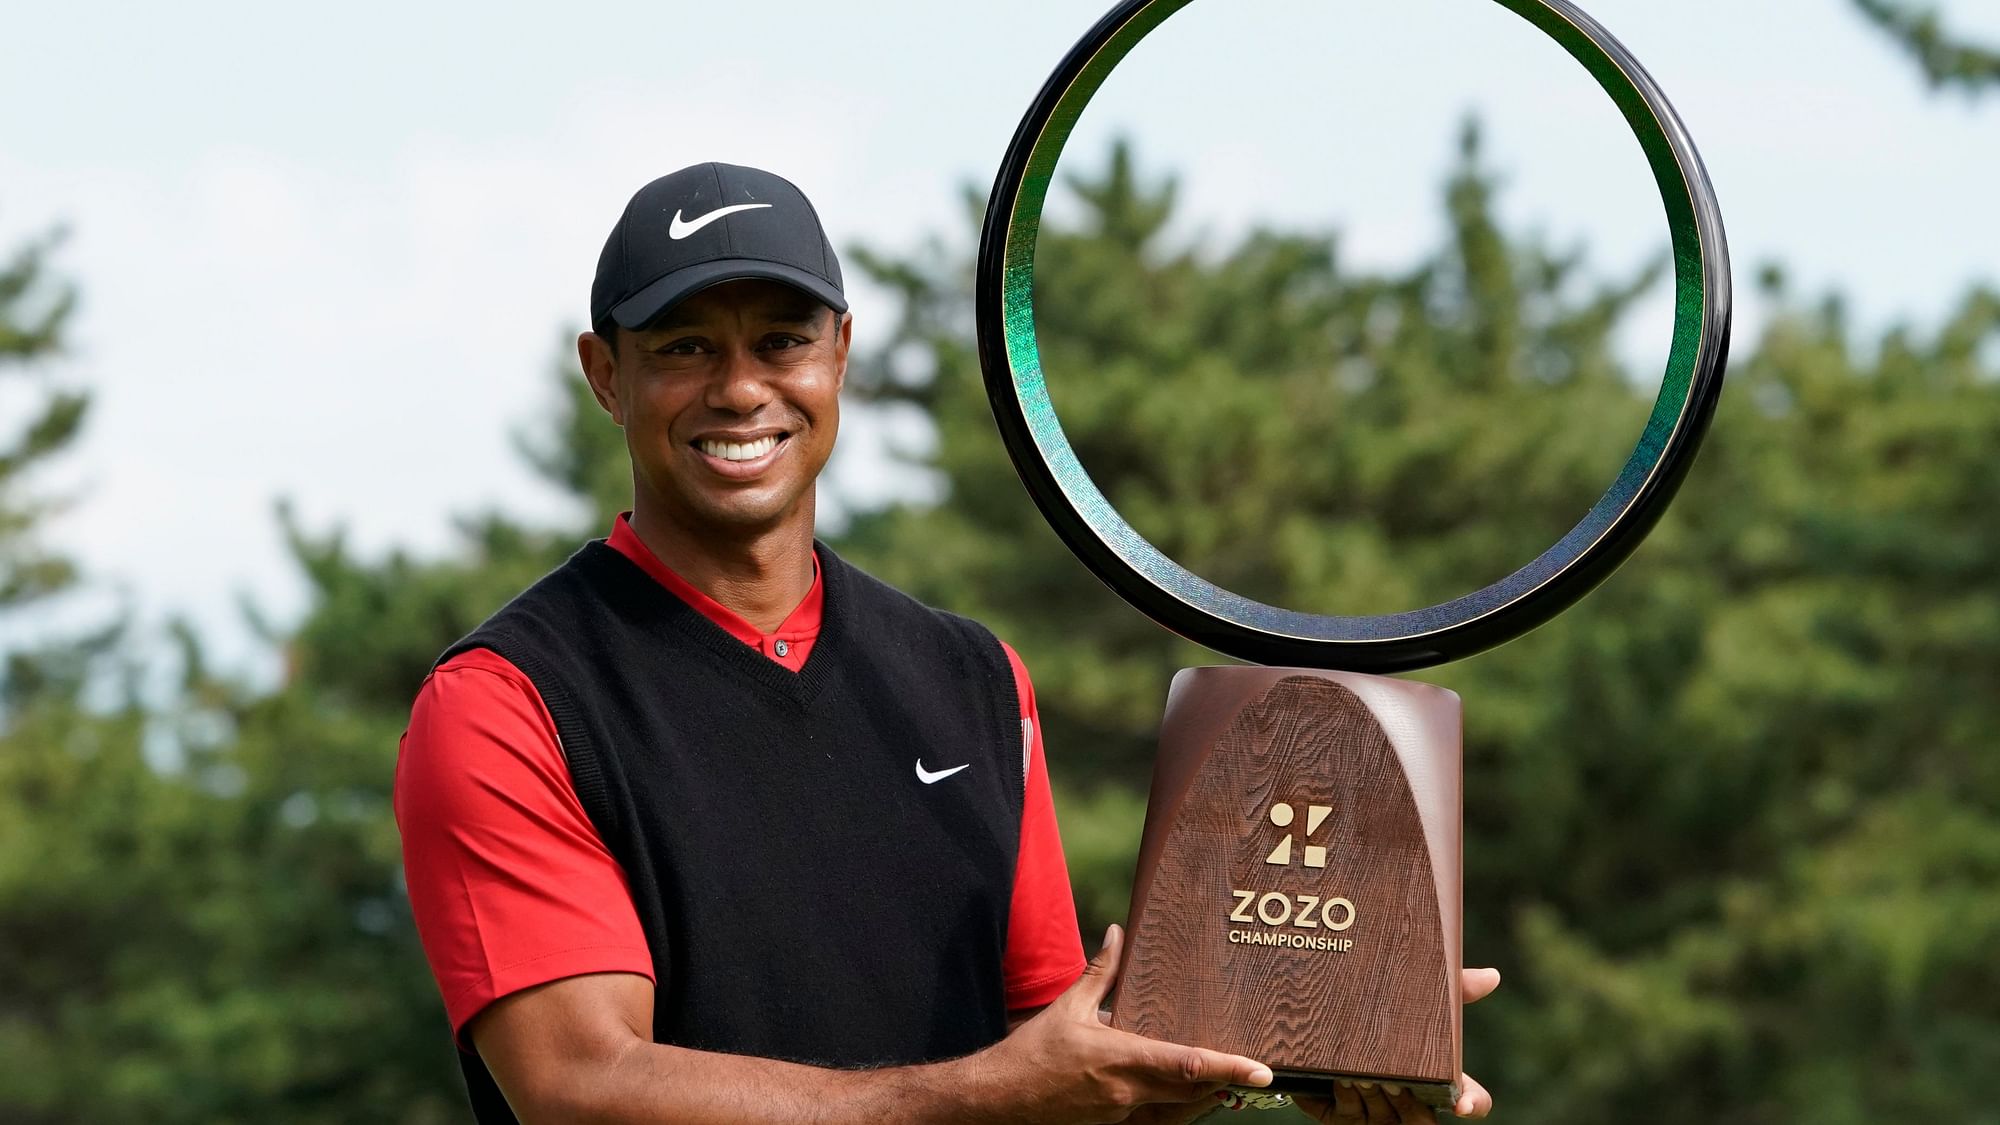 Tiger Woods Ties Sam Snead’s Record of 82 PGA Tour Victories